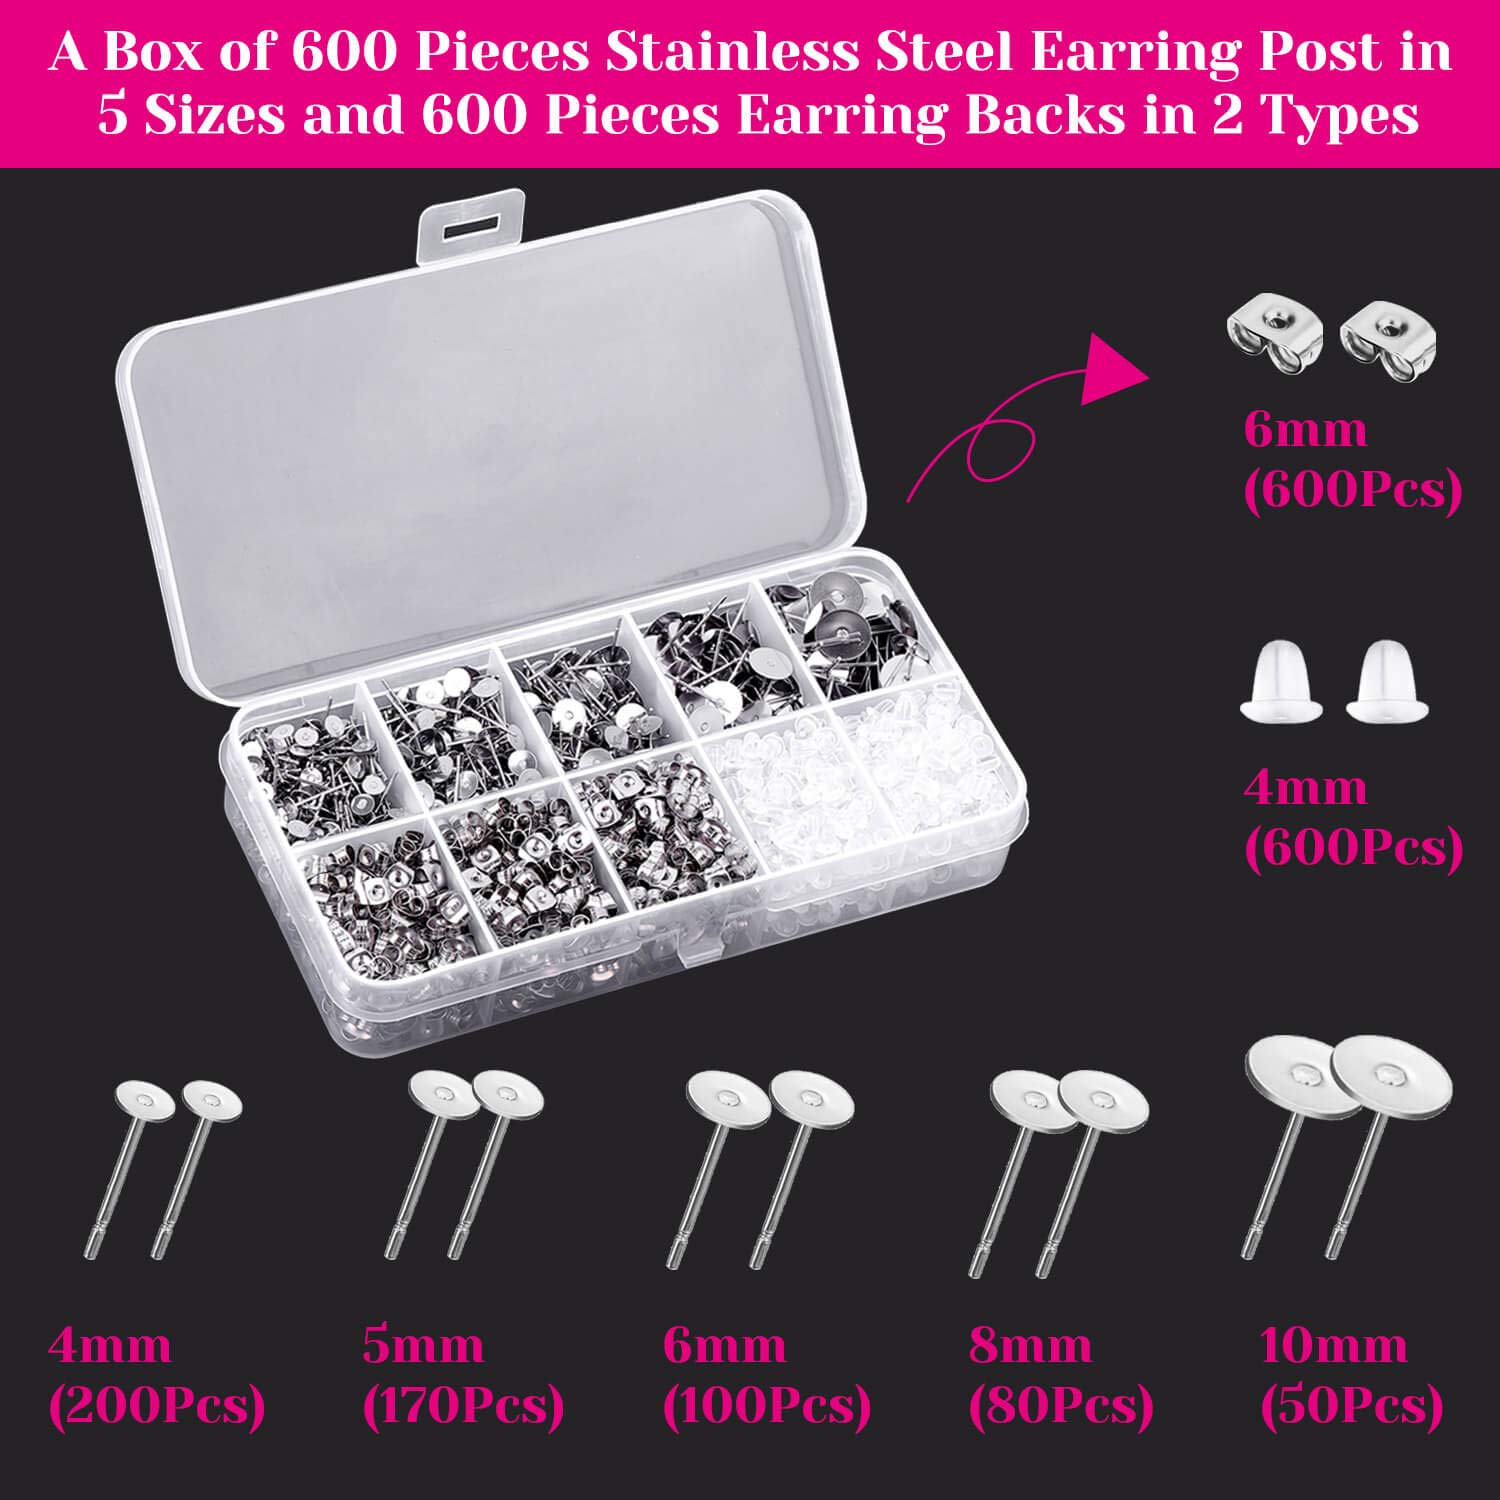 Earring Posts and Backs, Shynek 1800pcs Earring Making Supplies with Stainless Steel Earring Posts and Earring Backs for Studs, Earring Making Kit for DIY Earrings and Jewelry Making